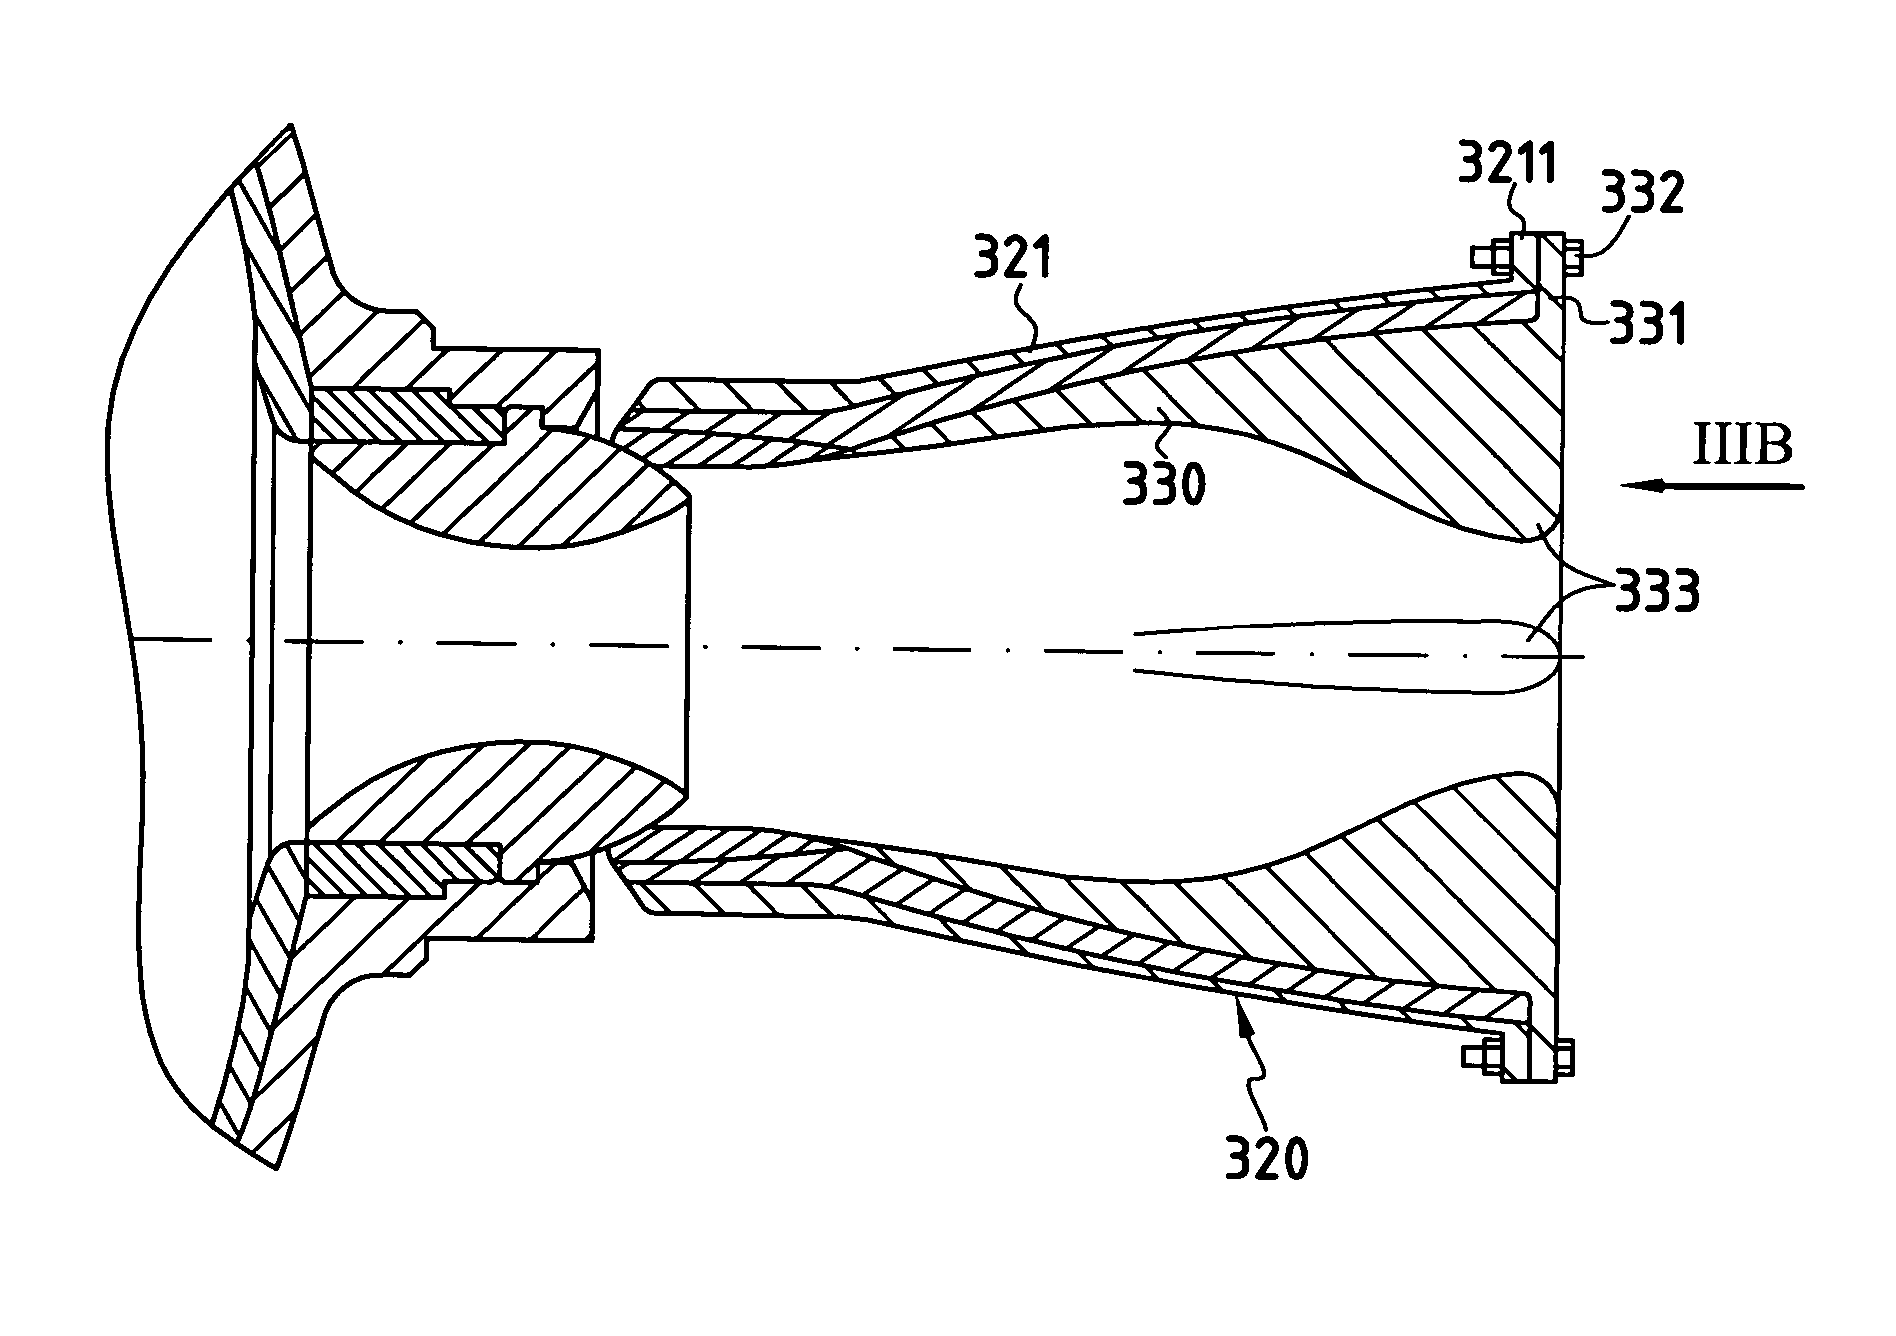 Adapter device for a rocket engine nozzle having a movable diverging portion